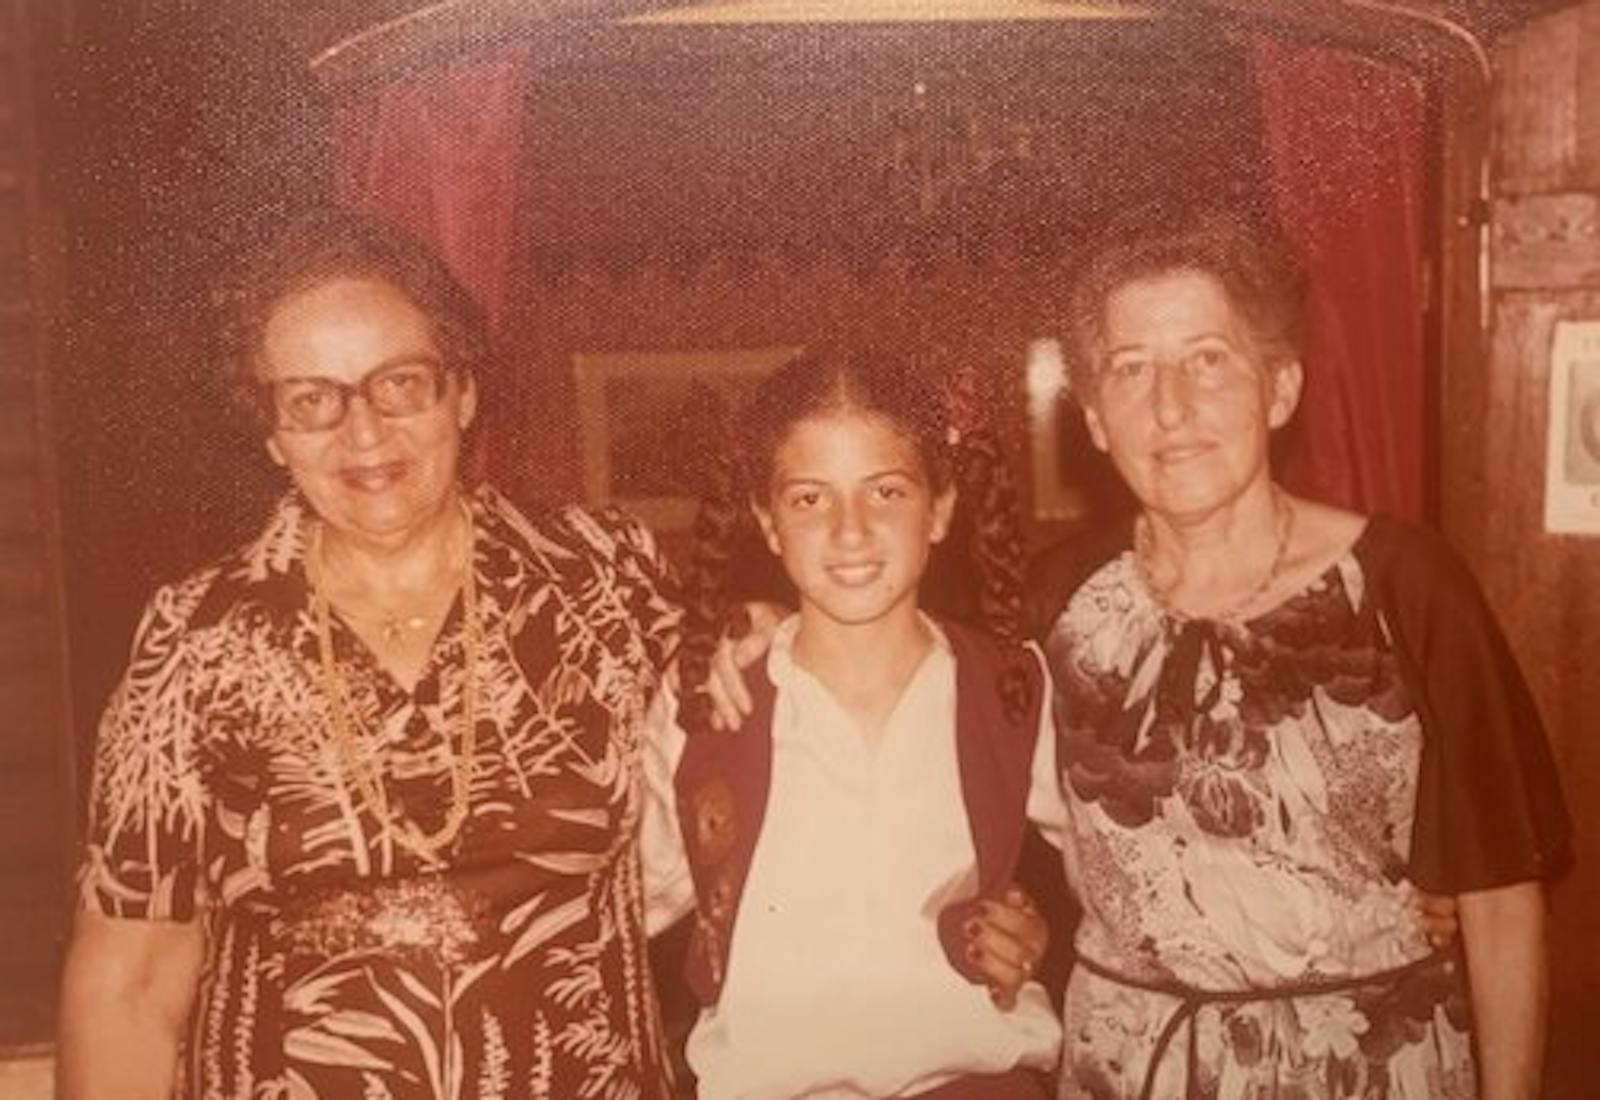 Rottem (center) with Hanom (left) and her Swiss grandmother Giza (right) at her Bat Mitzvah in Israel in 1979.